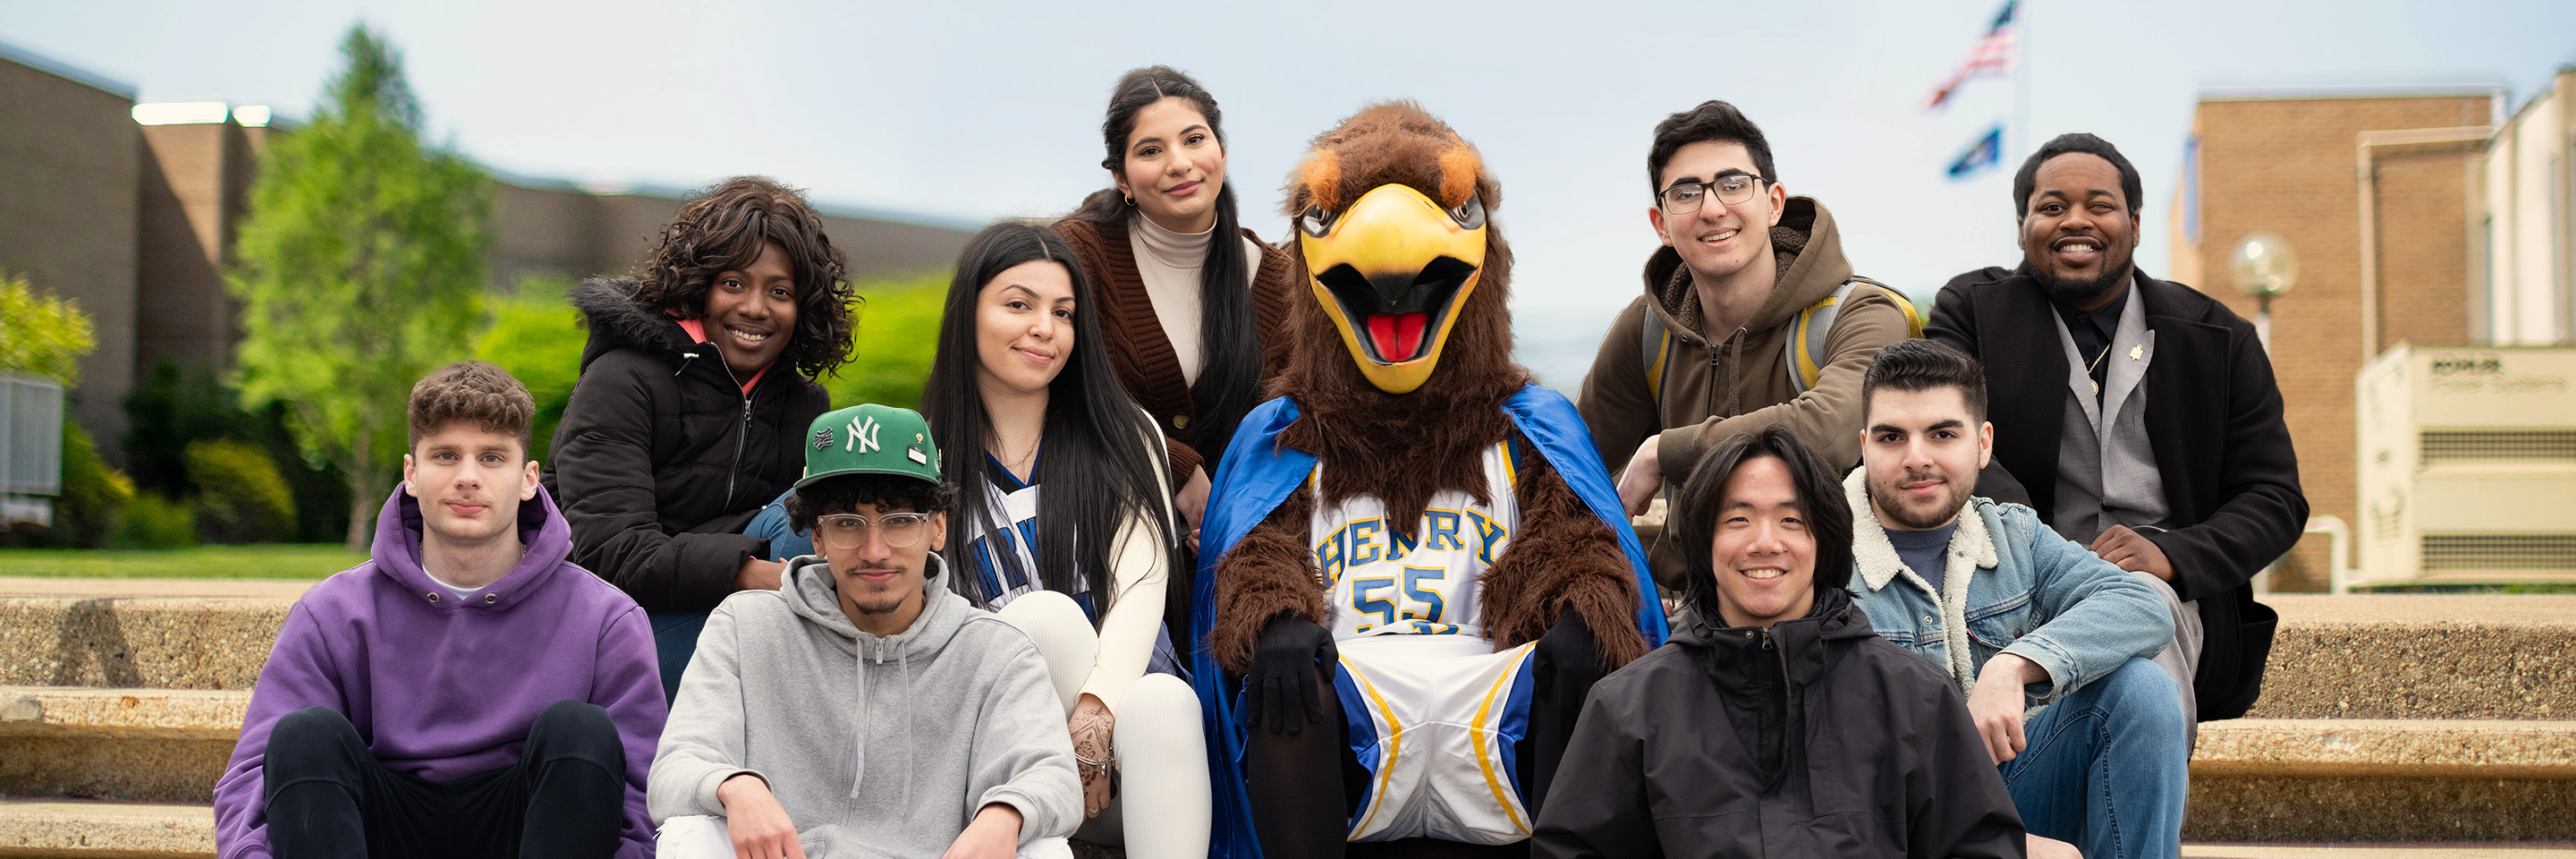 Students on Henry Ford College campus, sitting outside on a set of stairs with the HFC mascot "Hawkster"